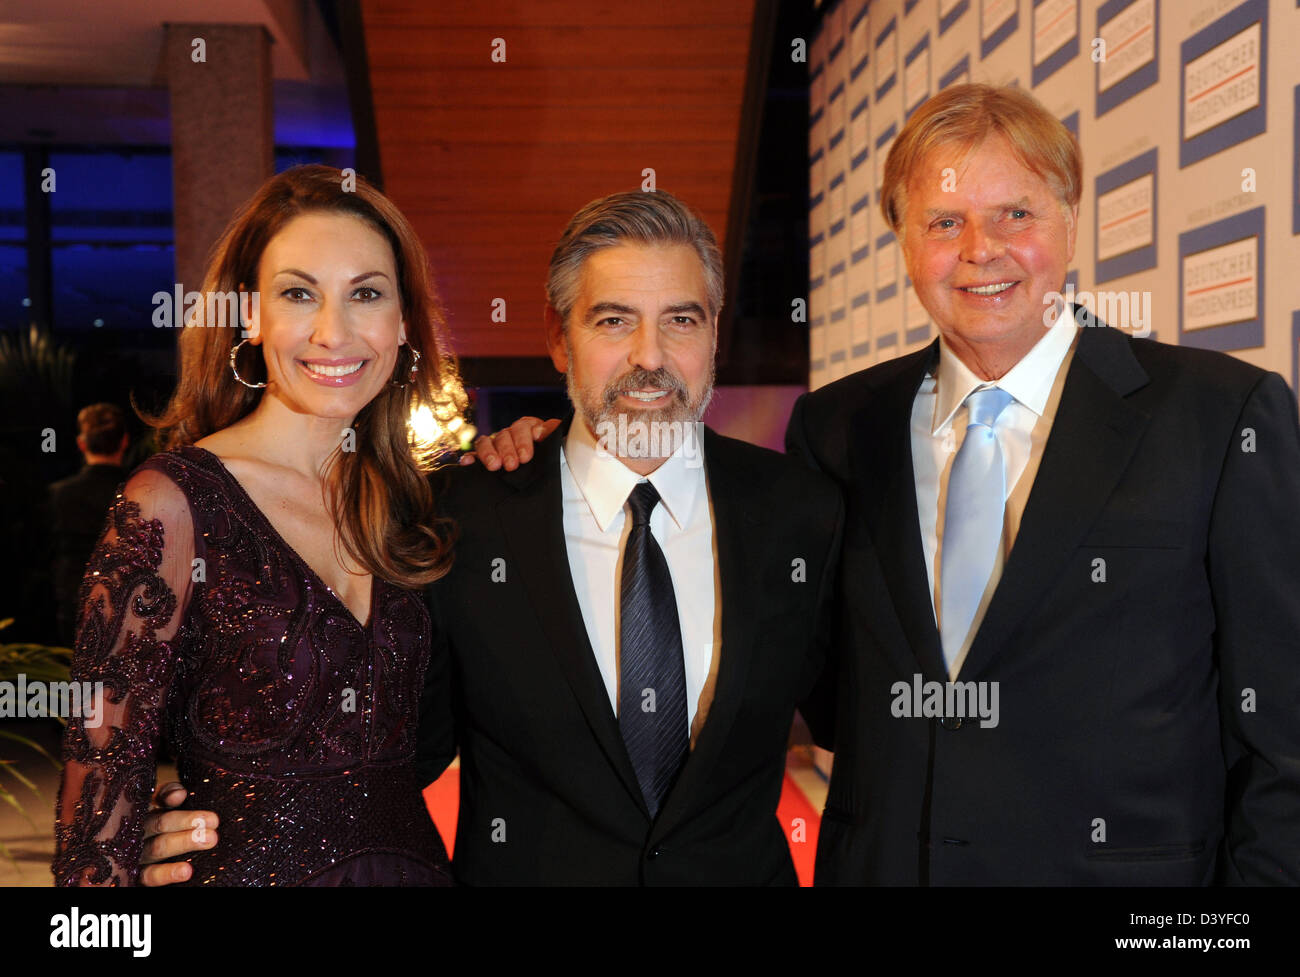 Baden-Baden, Germany. 26th February 2013. The prizer winner of the German Media Prize 2012, US actor George Clooney (C), arrives for the award ceremony with Karlheinz Koegel (R) of Media Control and Koegel's wife Dagmar in Baden-Baden, Germany, 26 February 2013. Photo: Uli Deck/dpa/Alamy Live News Stock Photo